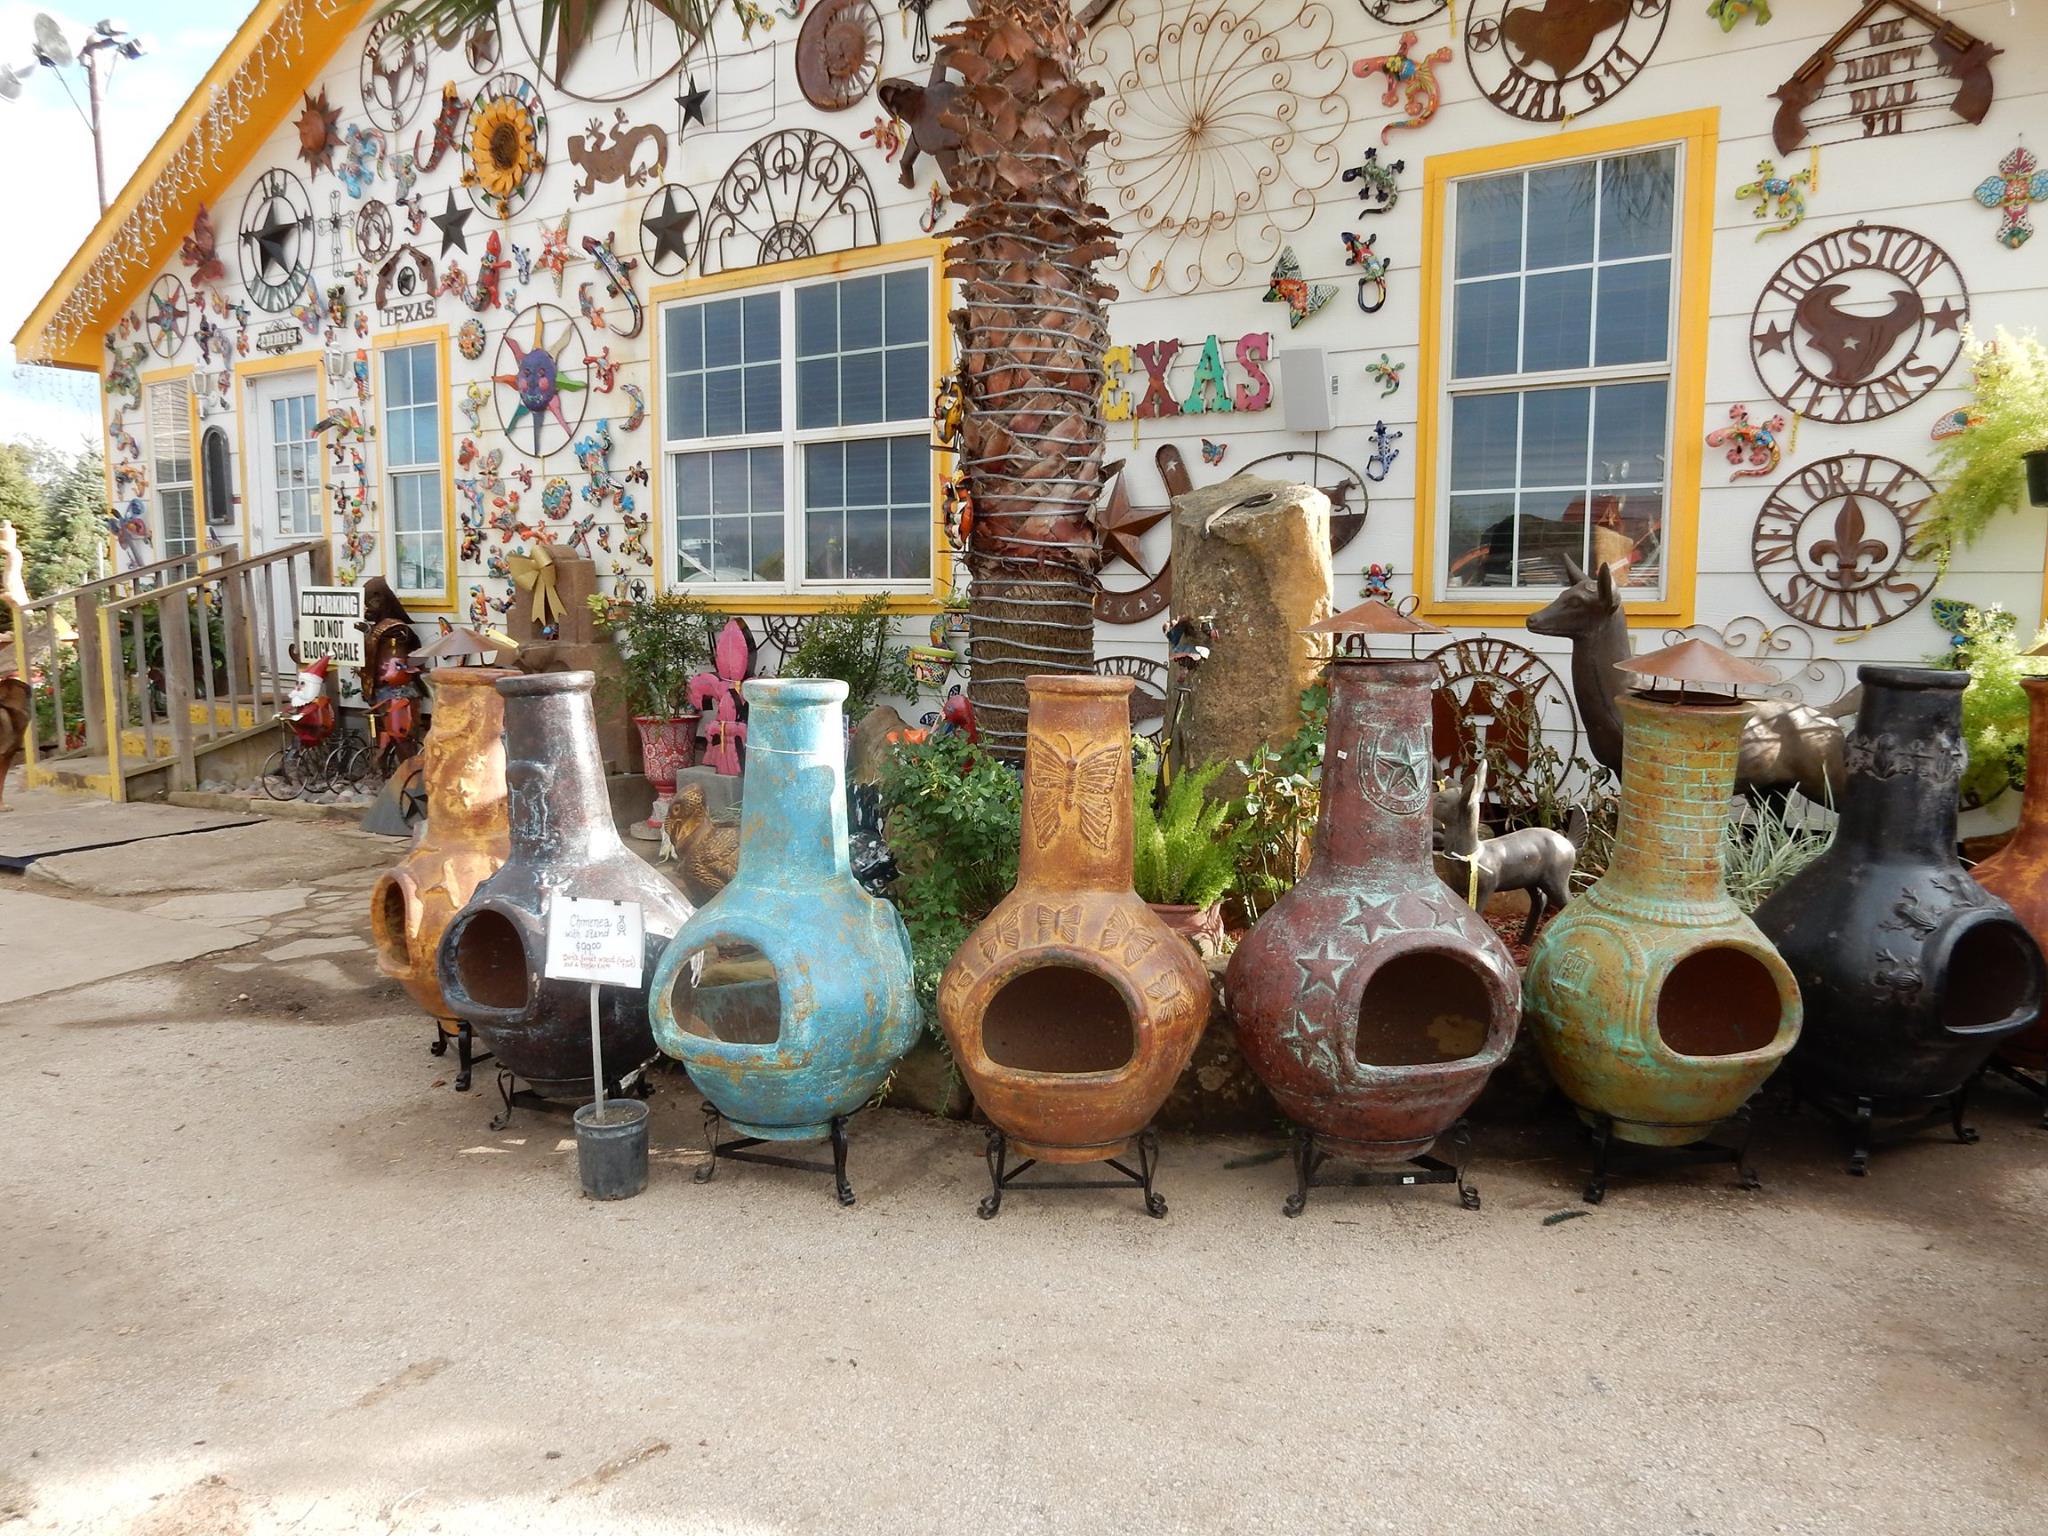 Yard decorations like pottery and metal decorations at Madison Gardens Nursery, Spring, TX.